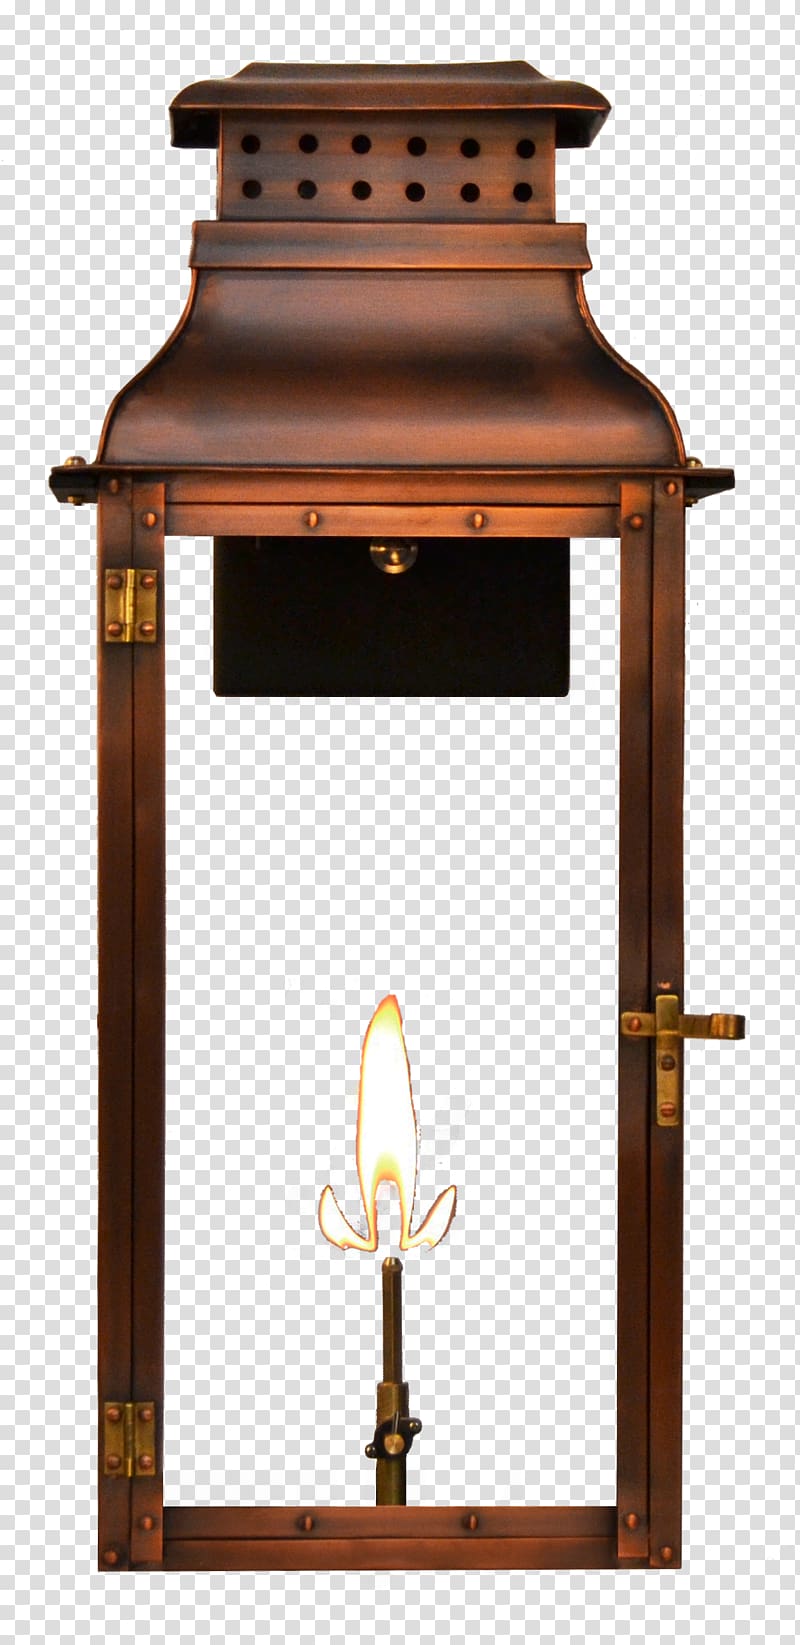 Lighting Light fixture Lantern Coppersmith, tuscan transparent background PNG clipart